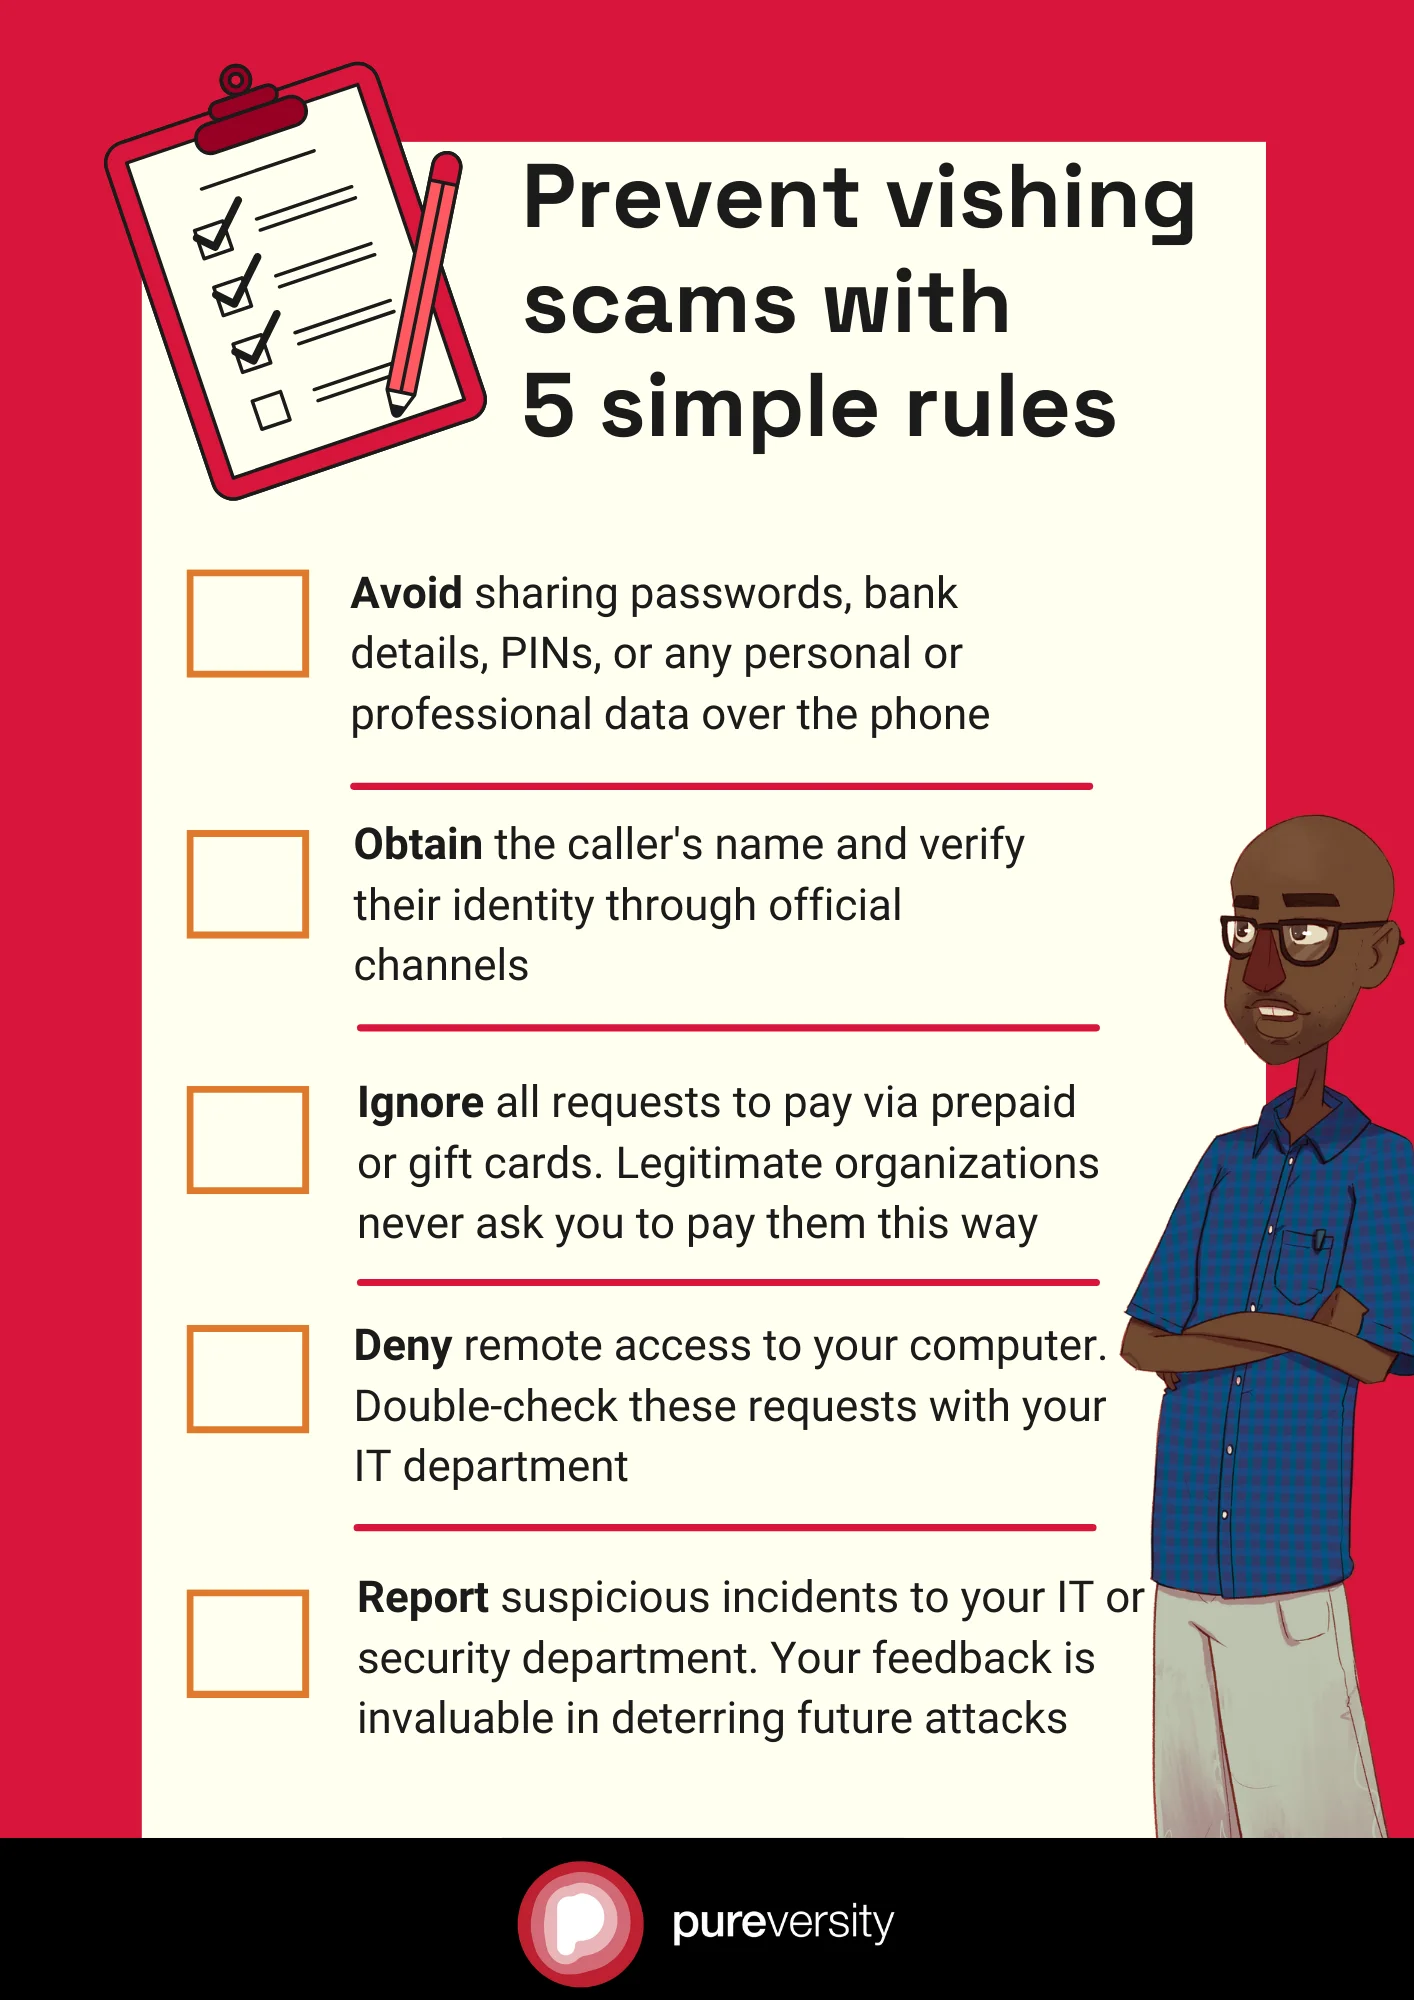 A list of rules to prevent vishing scams